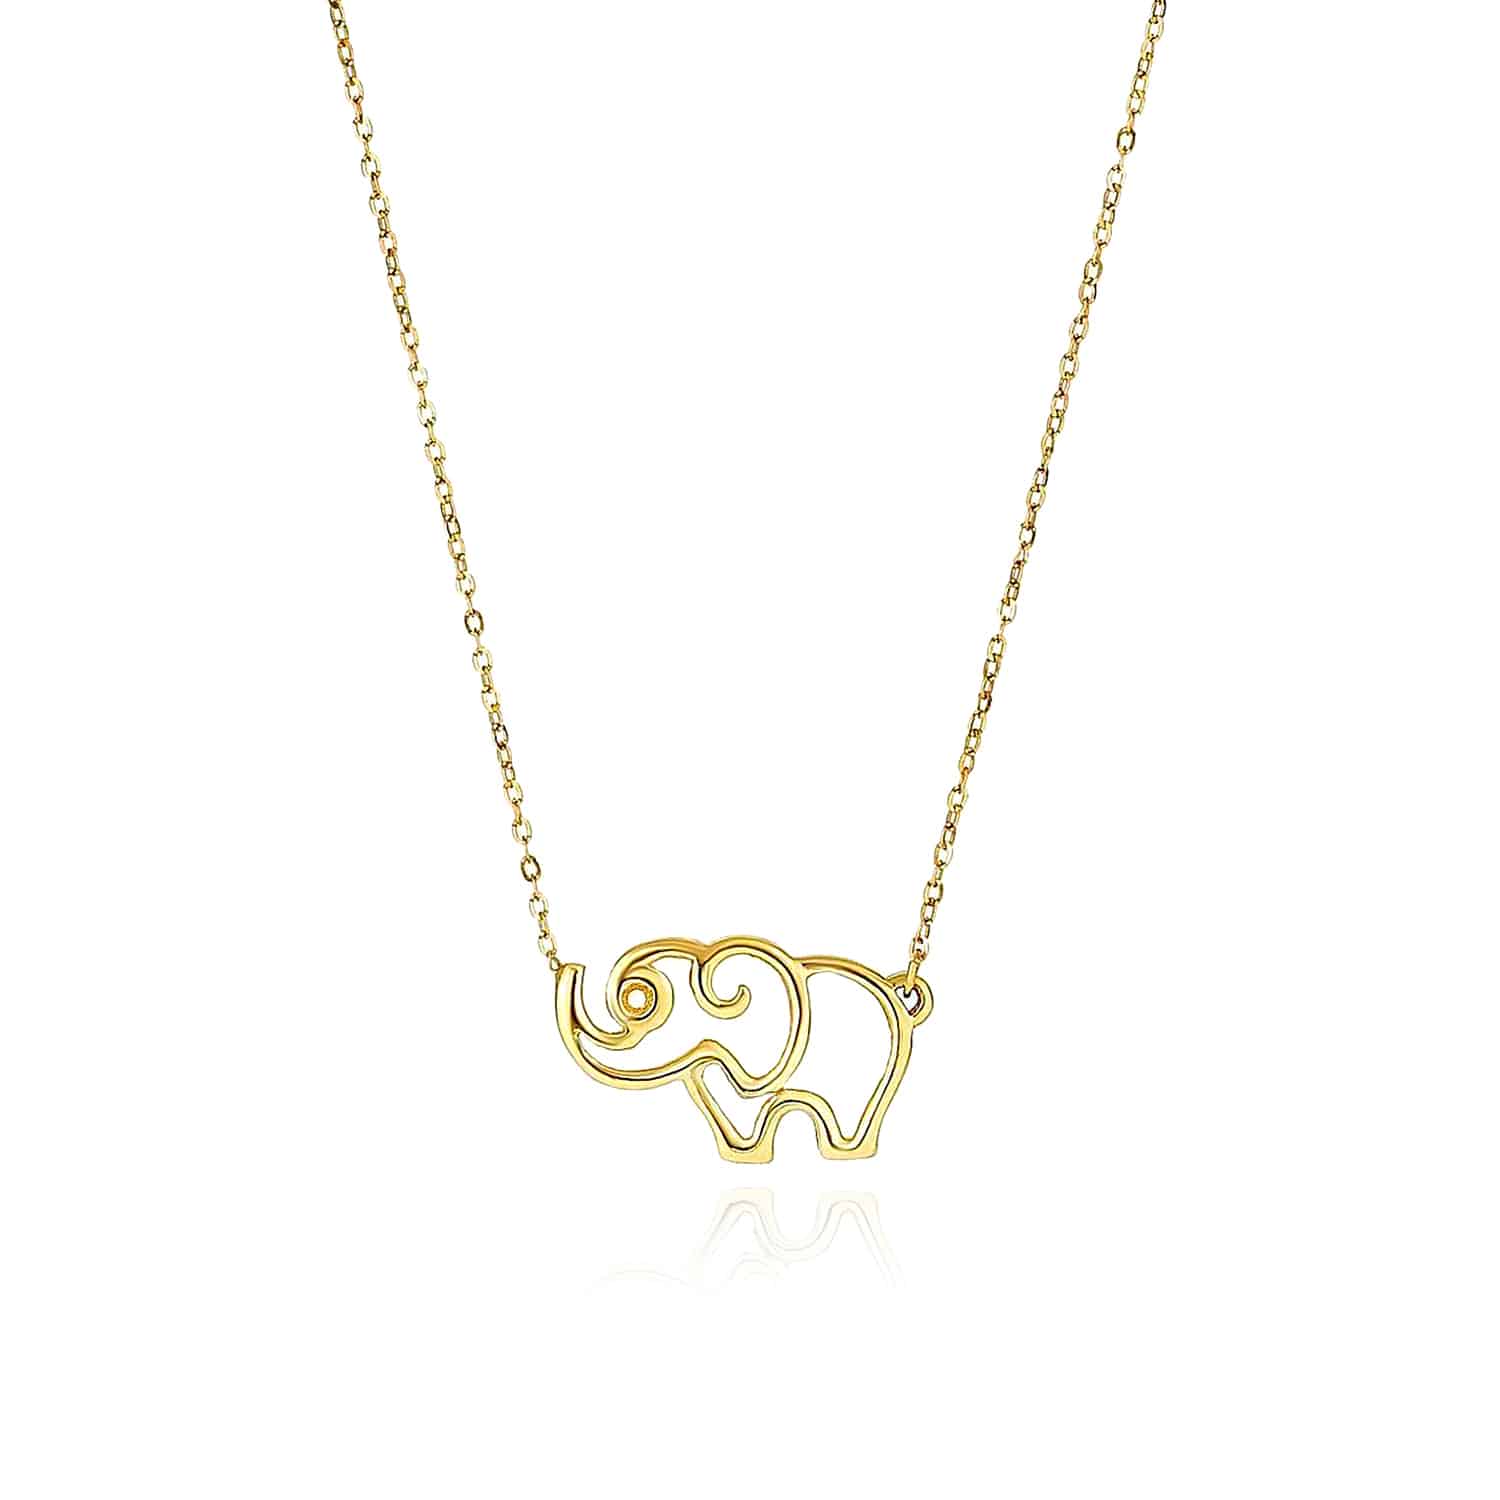 14K Yellow Gold Open Elephant Pendant Chain Necklace 17"